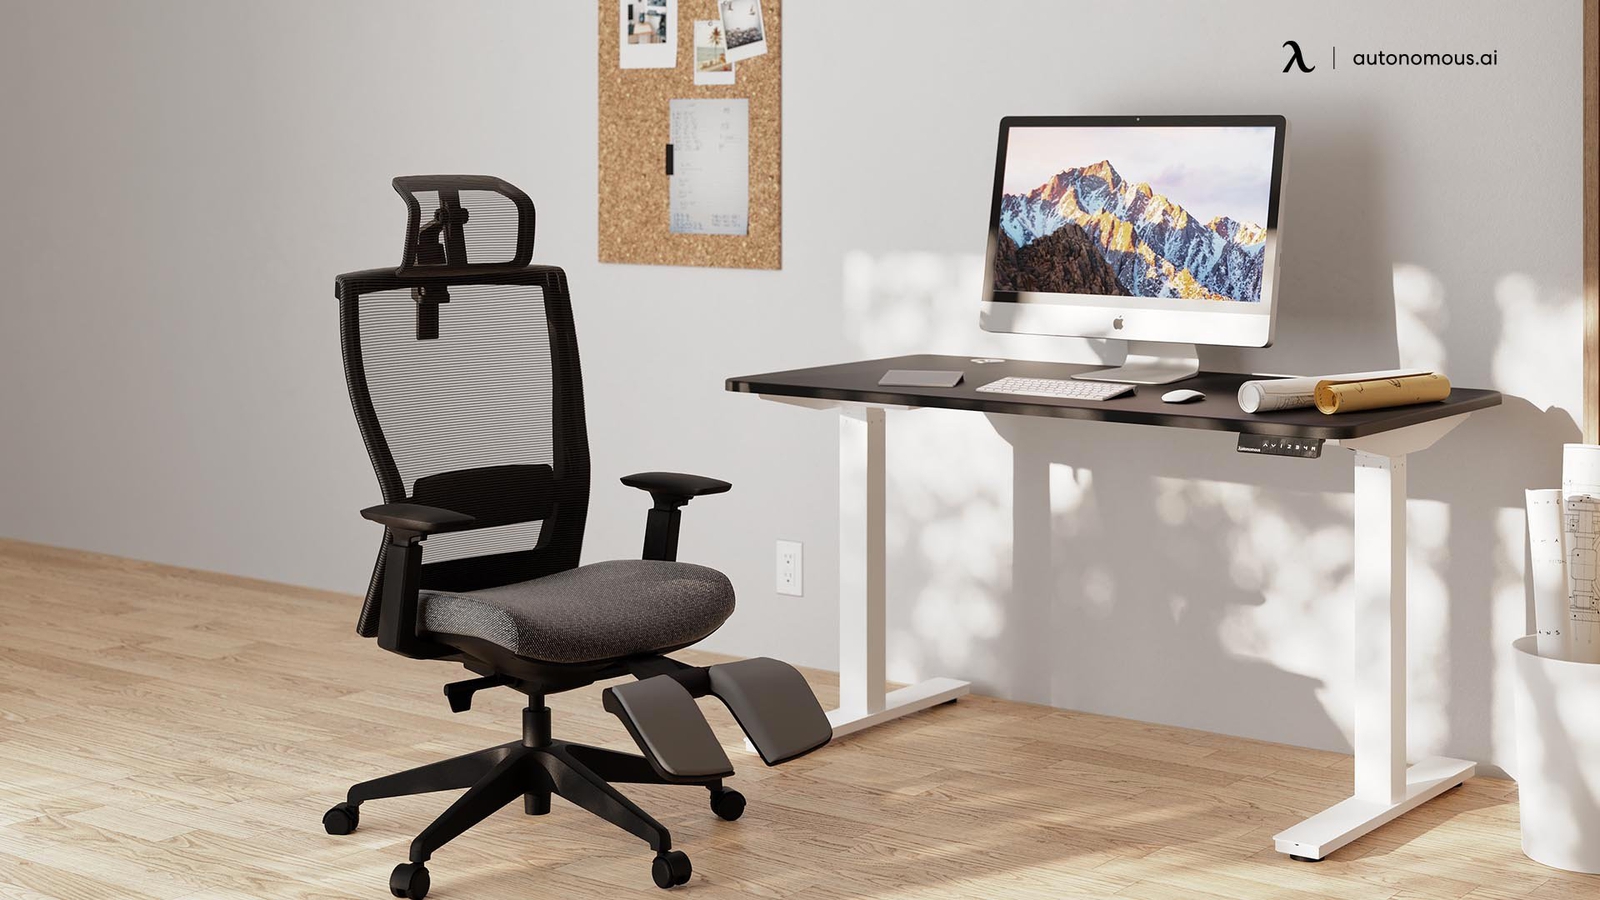 Top Comfortable Black Office Chairs to Match Your Office Theme